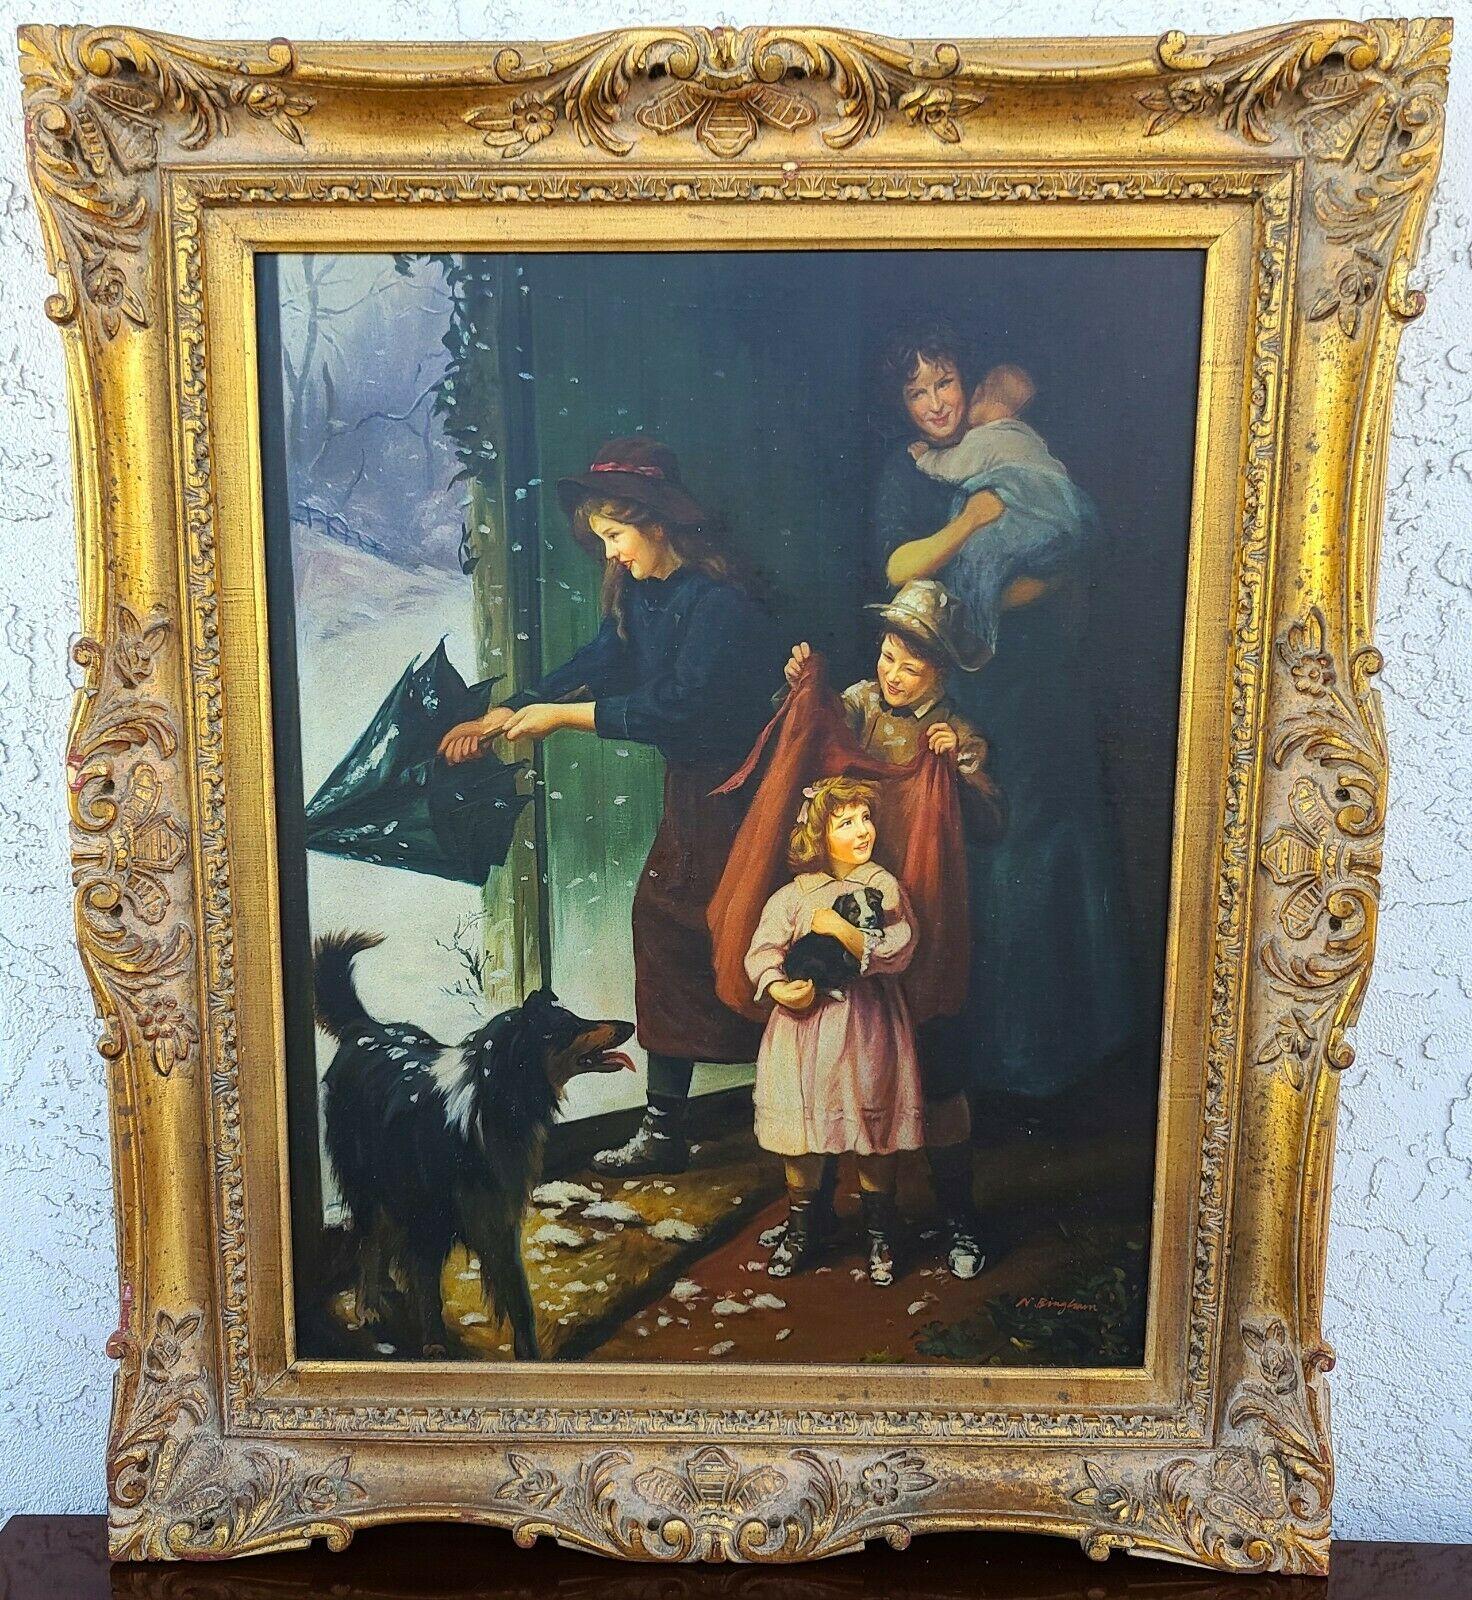 Offering One Of Our Recent Palm Beach Estate Fine Art Acquisitions Of A
Signed N Henry Bingham (AMERICAN, born 1939) original oil painting on canvas 
In an ornate Giltwood frame

Approximate Measurements in Inches
Frame: 32.75